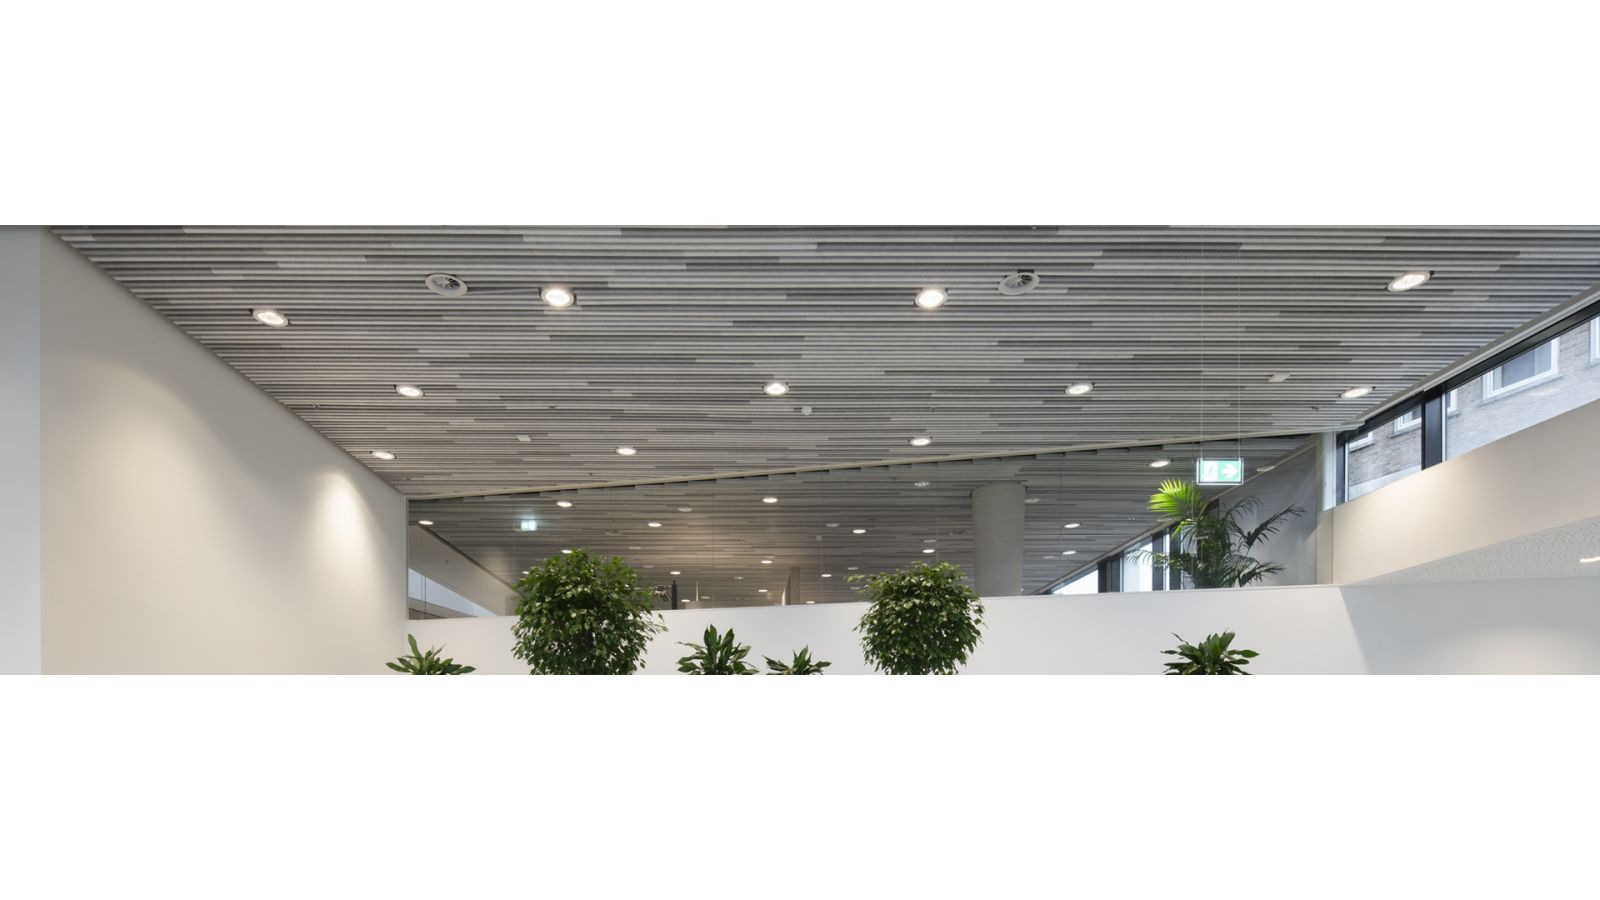 HEARTFELT LINEAR CEILINGS by CertainTeed Architectural